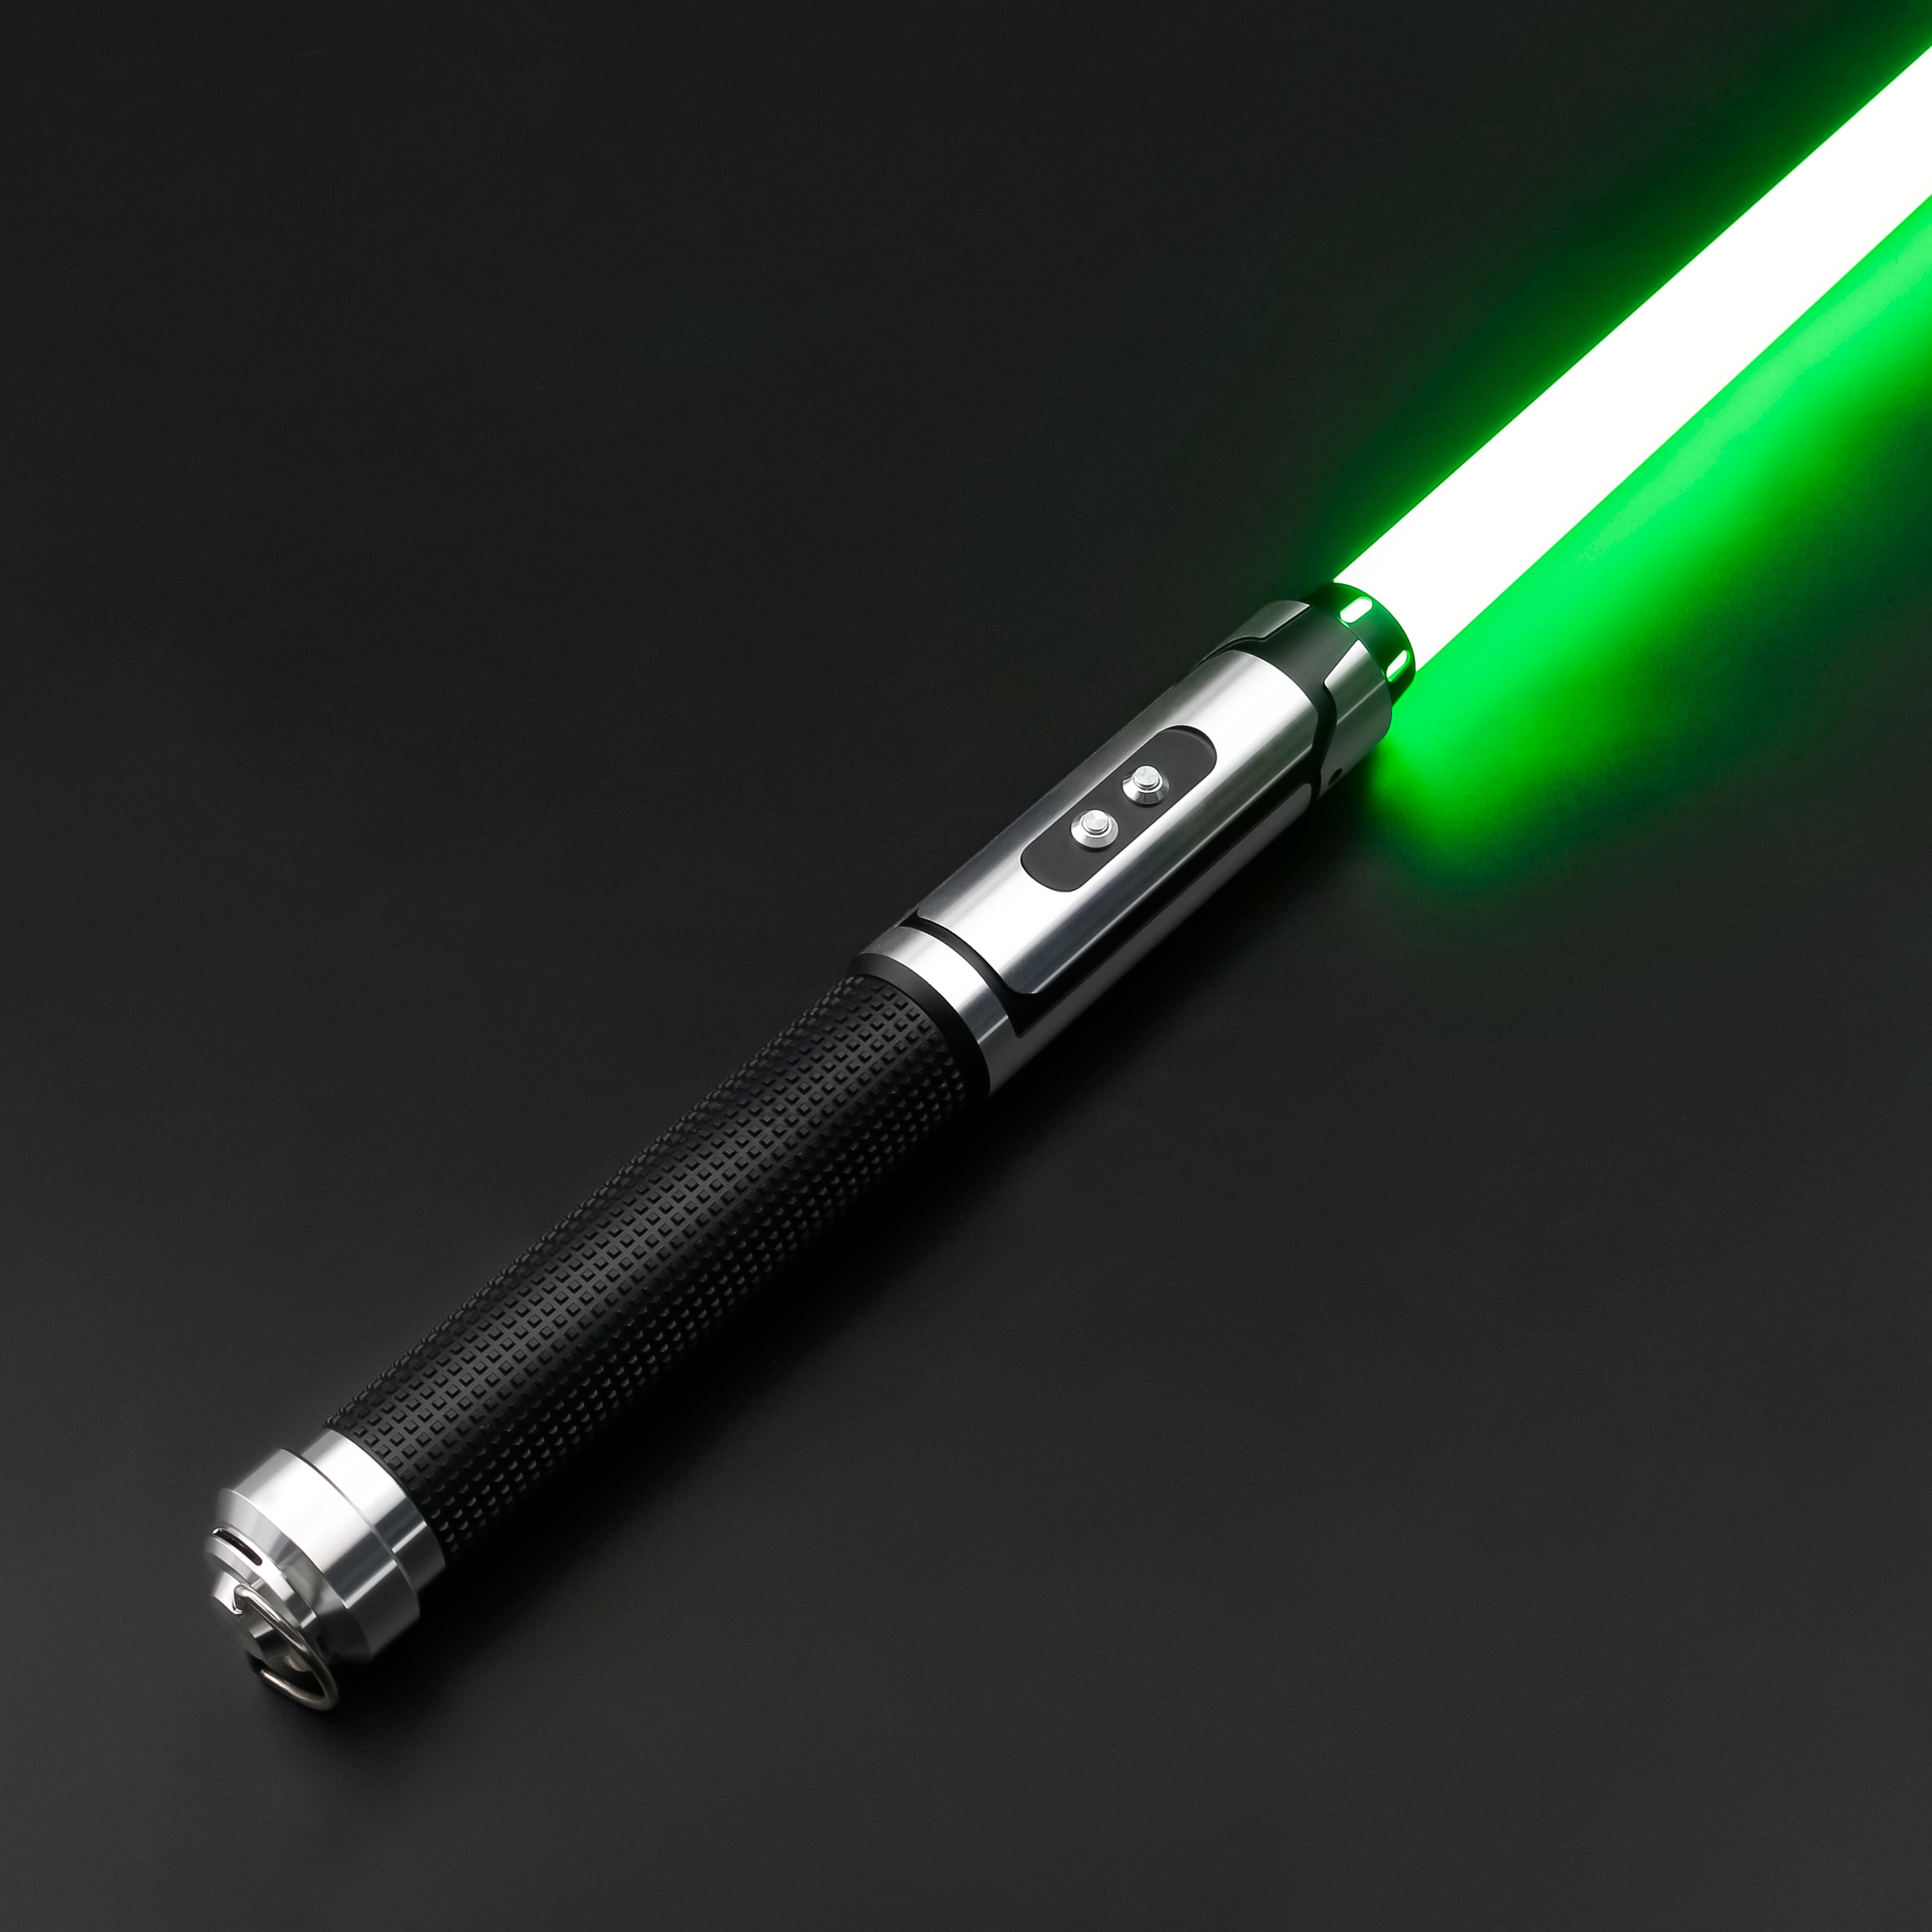 The Warden - Neopixel Lightsaber w/ Blade - Lightsaber Collection